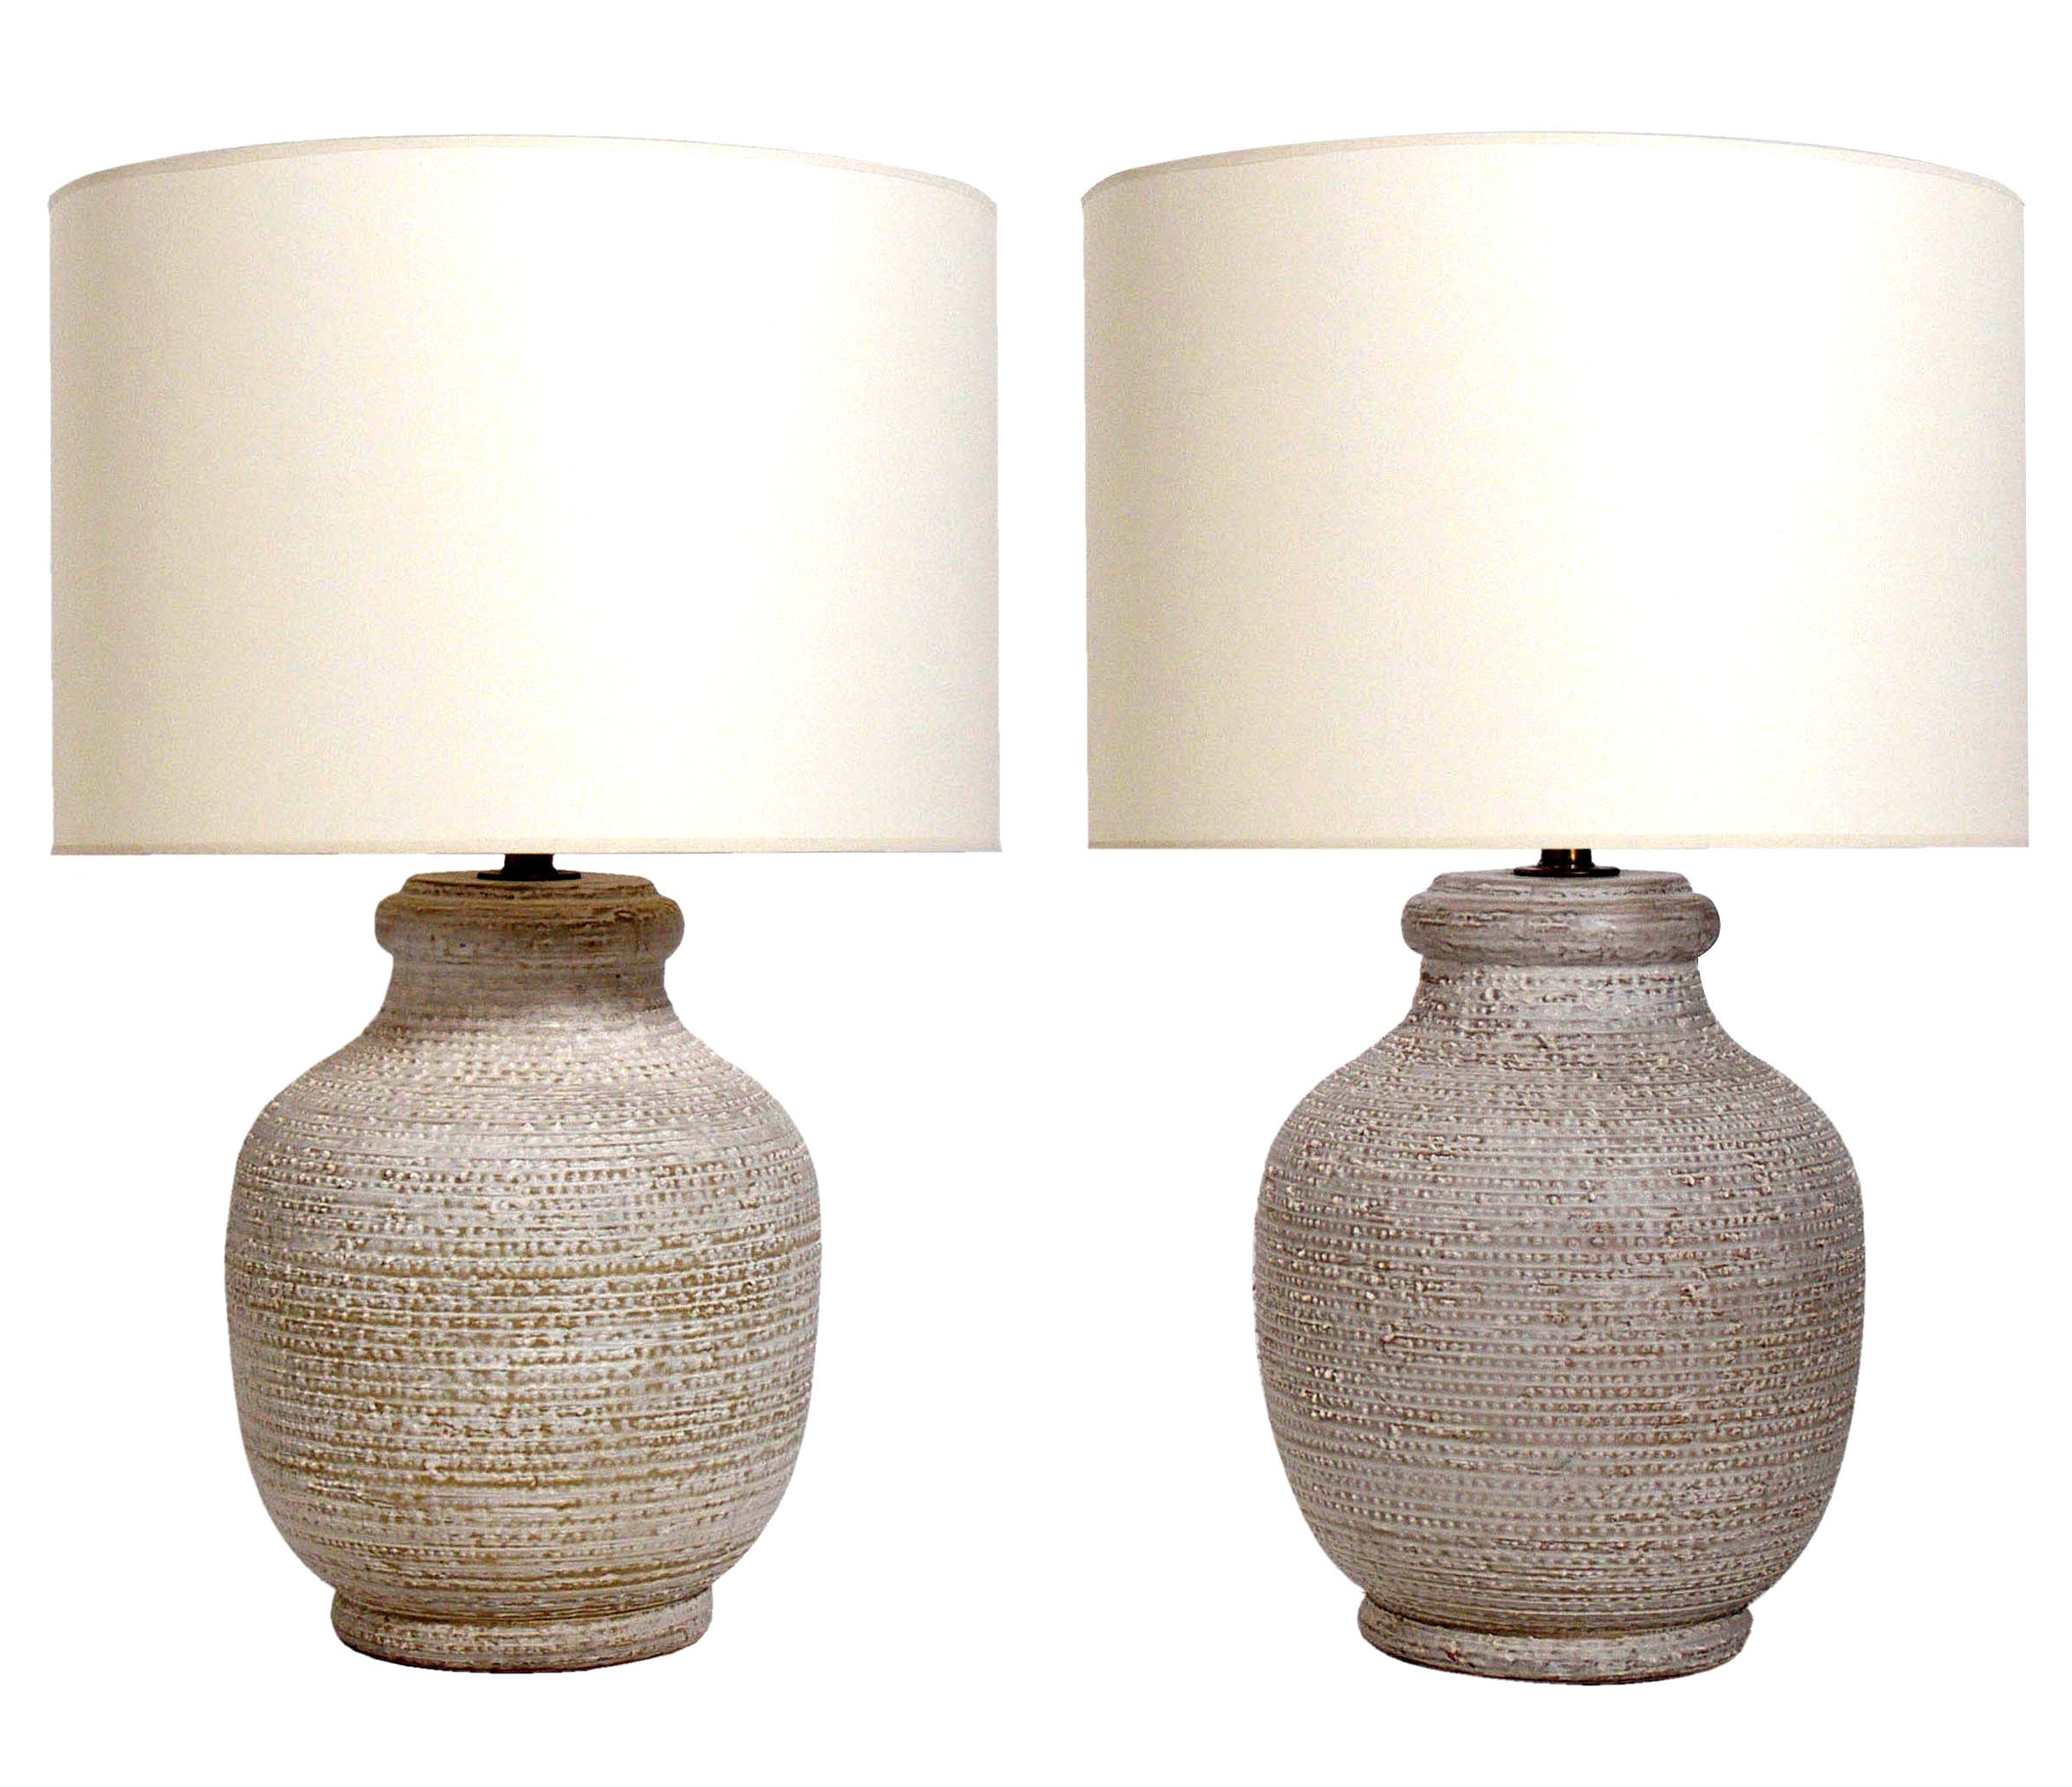 Pair of Ivory Color Textured Ceramic Lamps